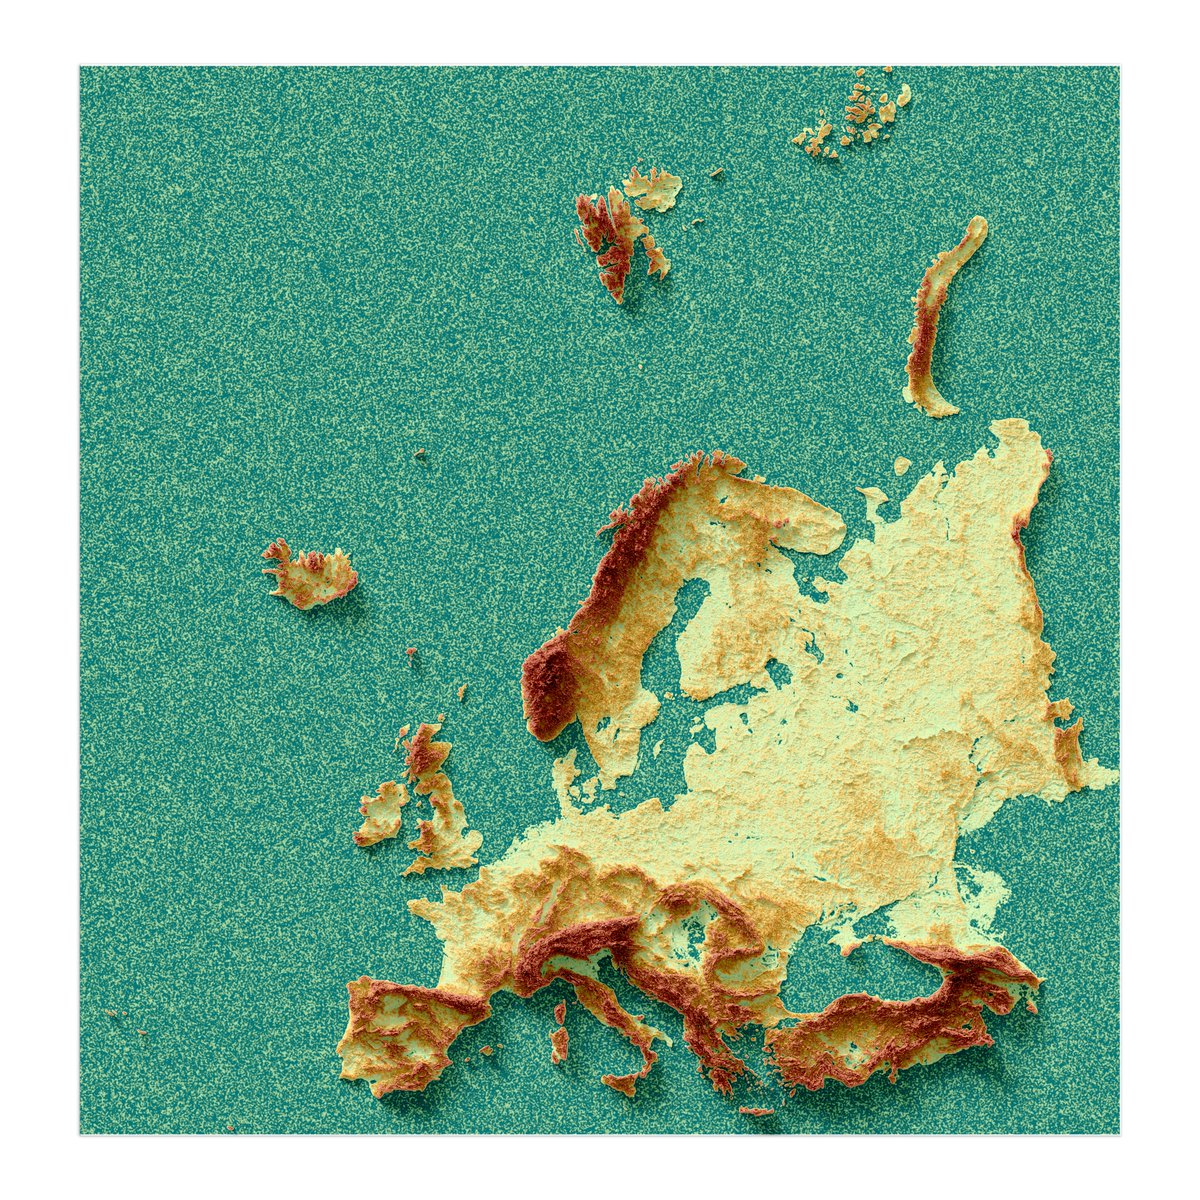 We start the week with this pop experiment on Europe. 
Could we give it a follow-up or is it better to keep it an isolated experiment?

#europe #maps #3dart #artdata #photoshop #blender3d